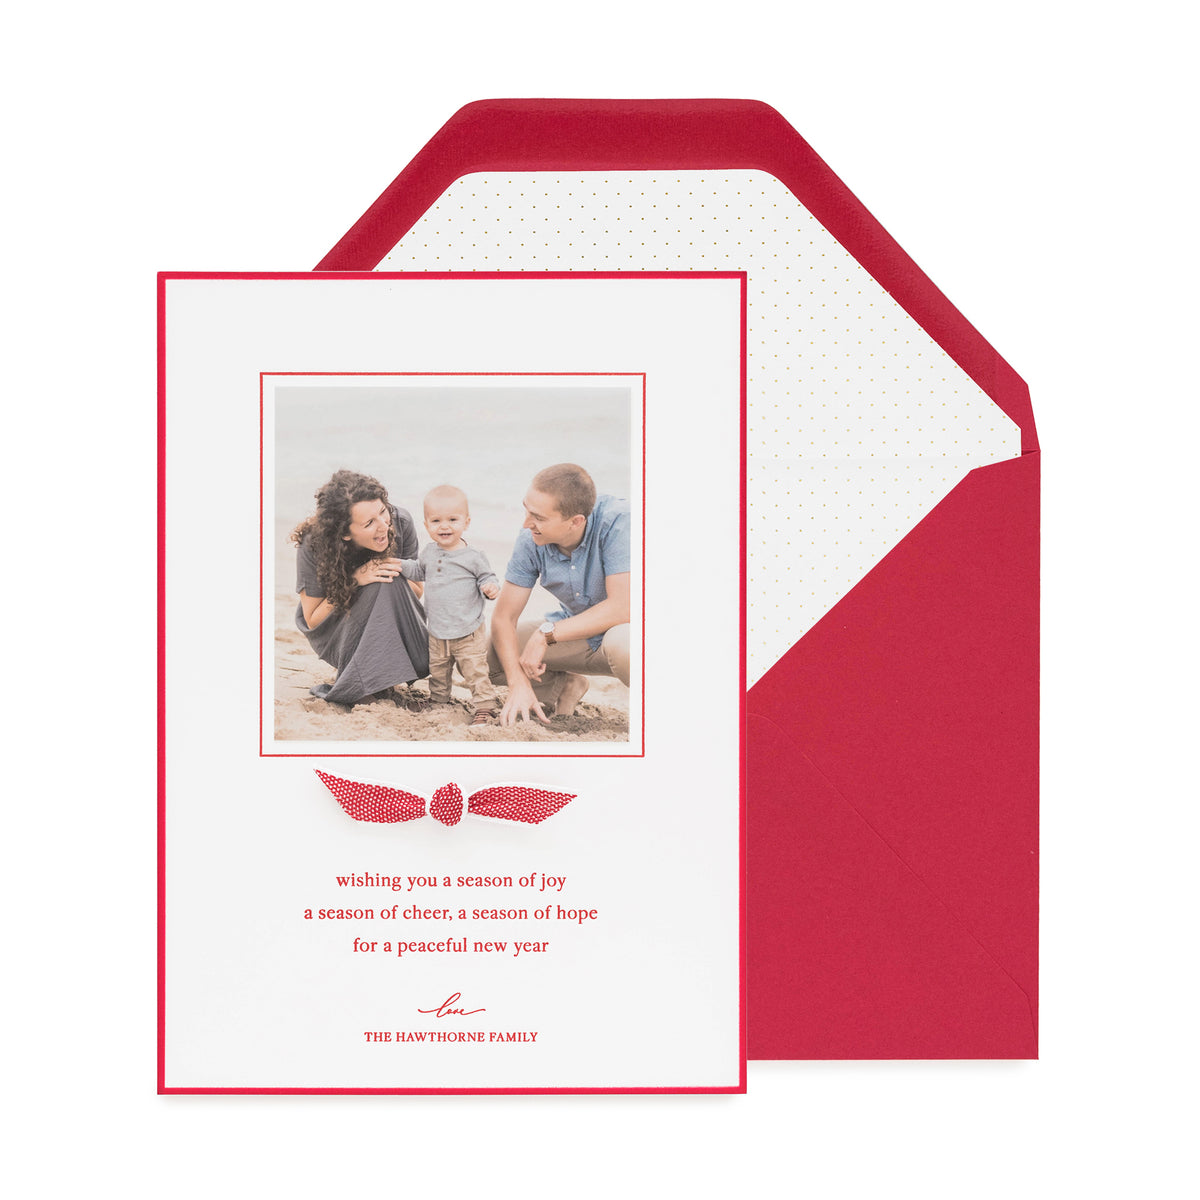 Red holiday photo card with a red and white ribbon